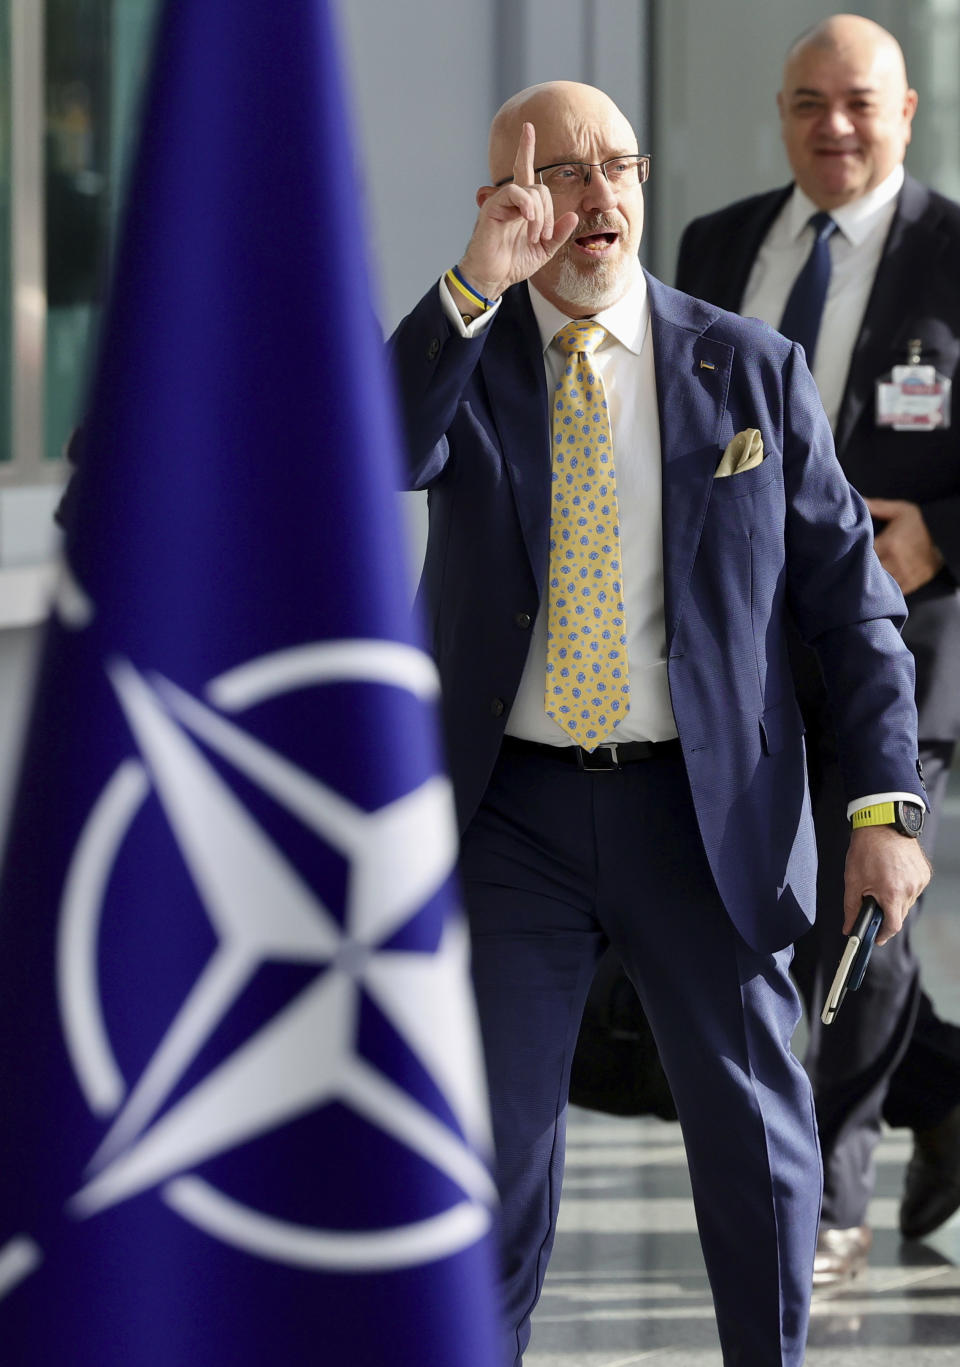 Ukrainian Minister of Defence Oleksii Reznikov gestures as he arrives for a meeting of NATO defense ministers at NATO headquarters in Brussels, Wednesday, Oct. 12, 2022. (AP Photo/Olivier Matthys)